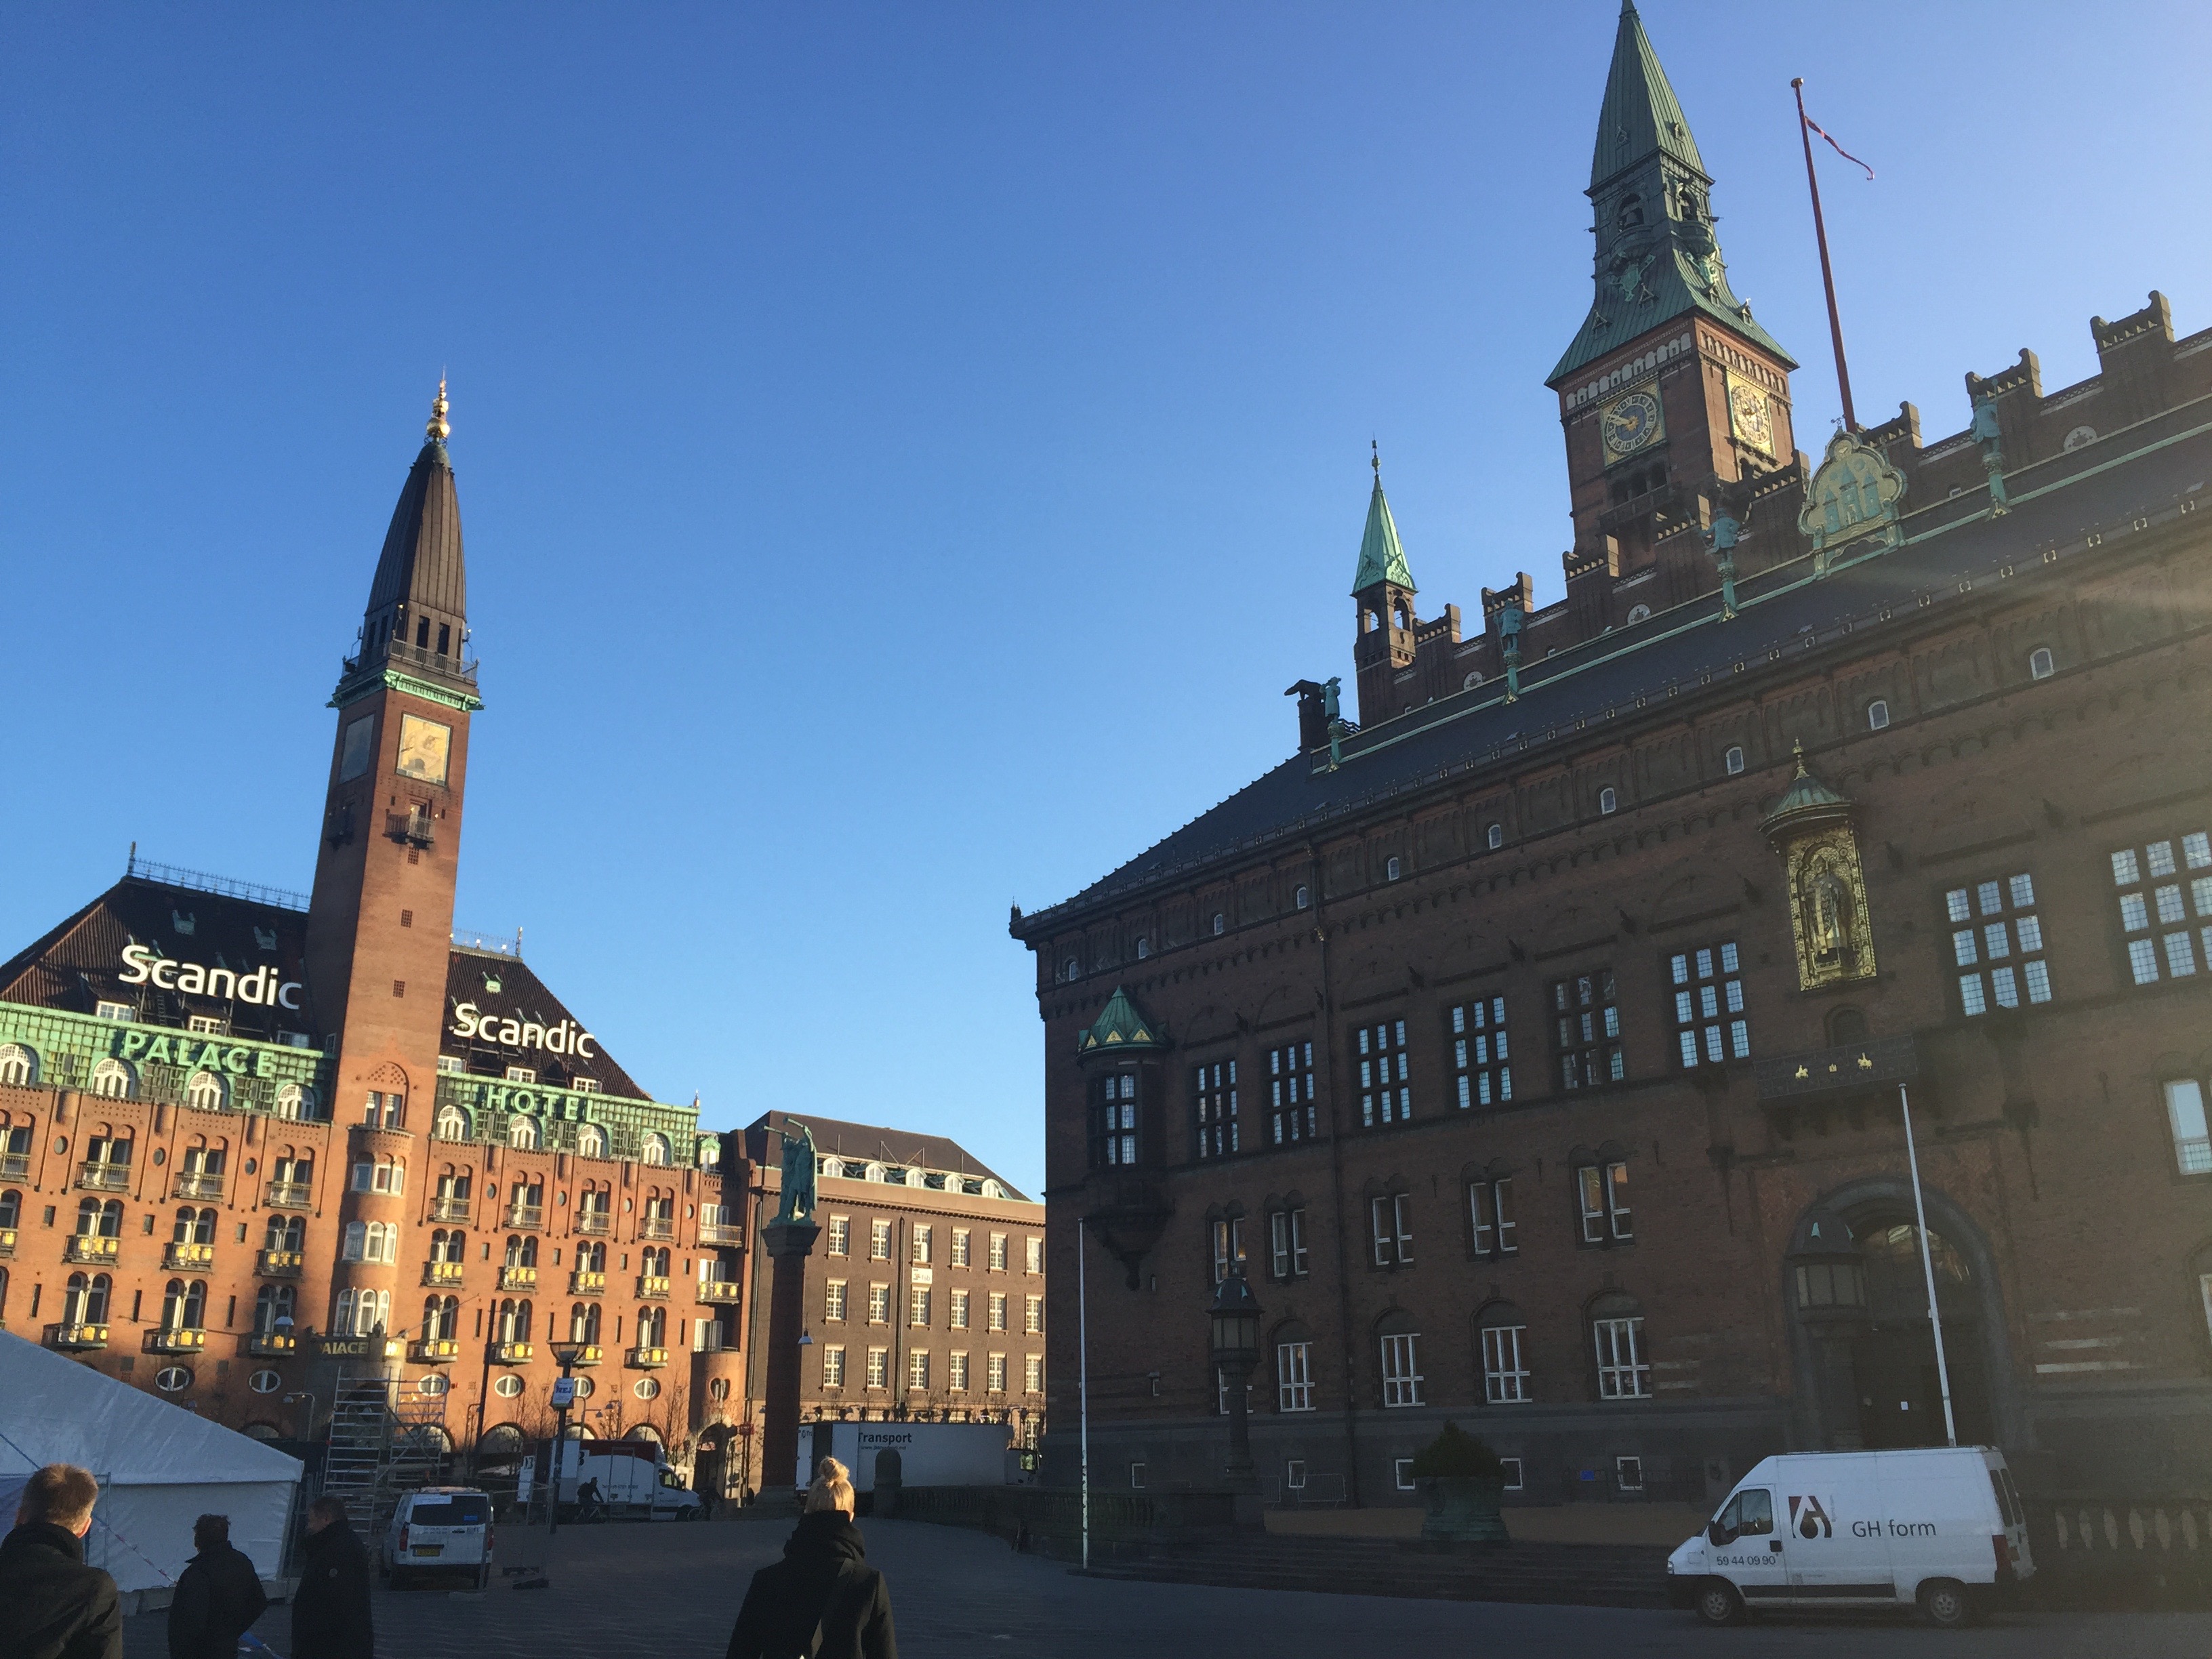 Scandic Palace Hotel and City Town Hall, Copenhagen